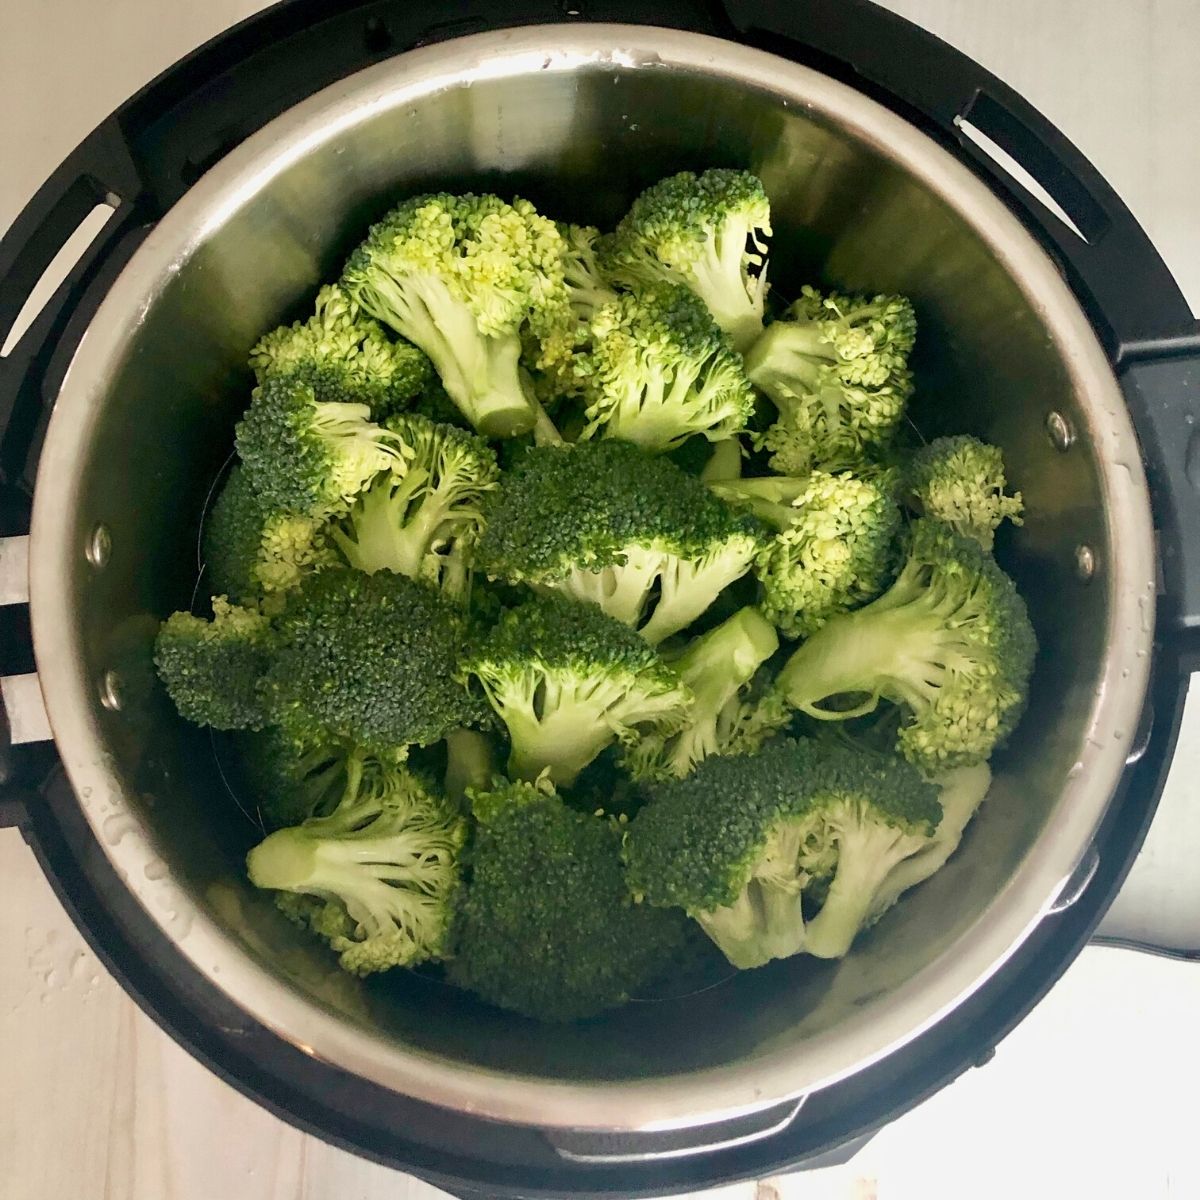 an Instant Pot filled with raw broccoli florets.